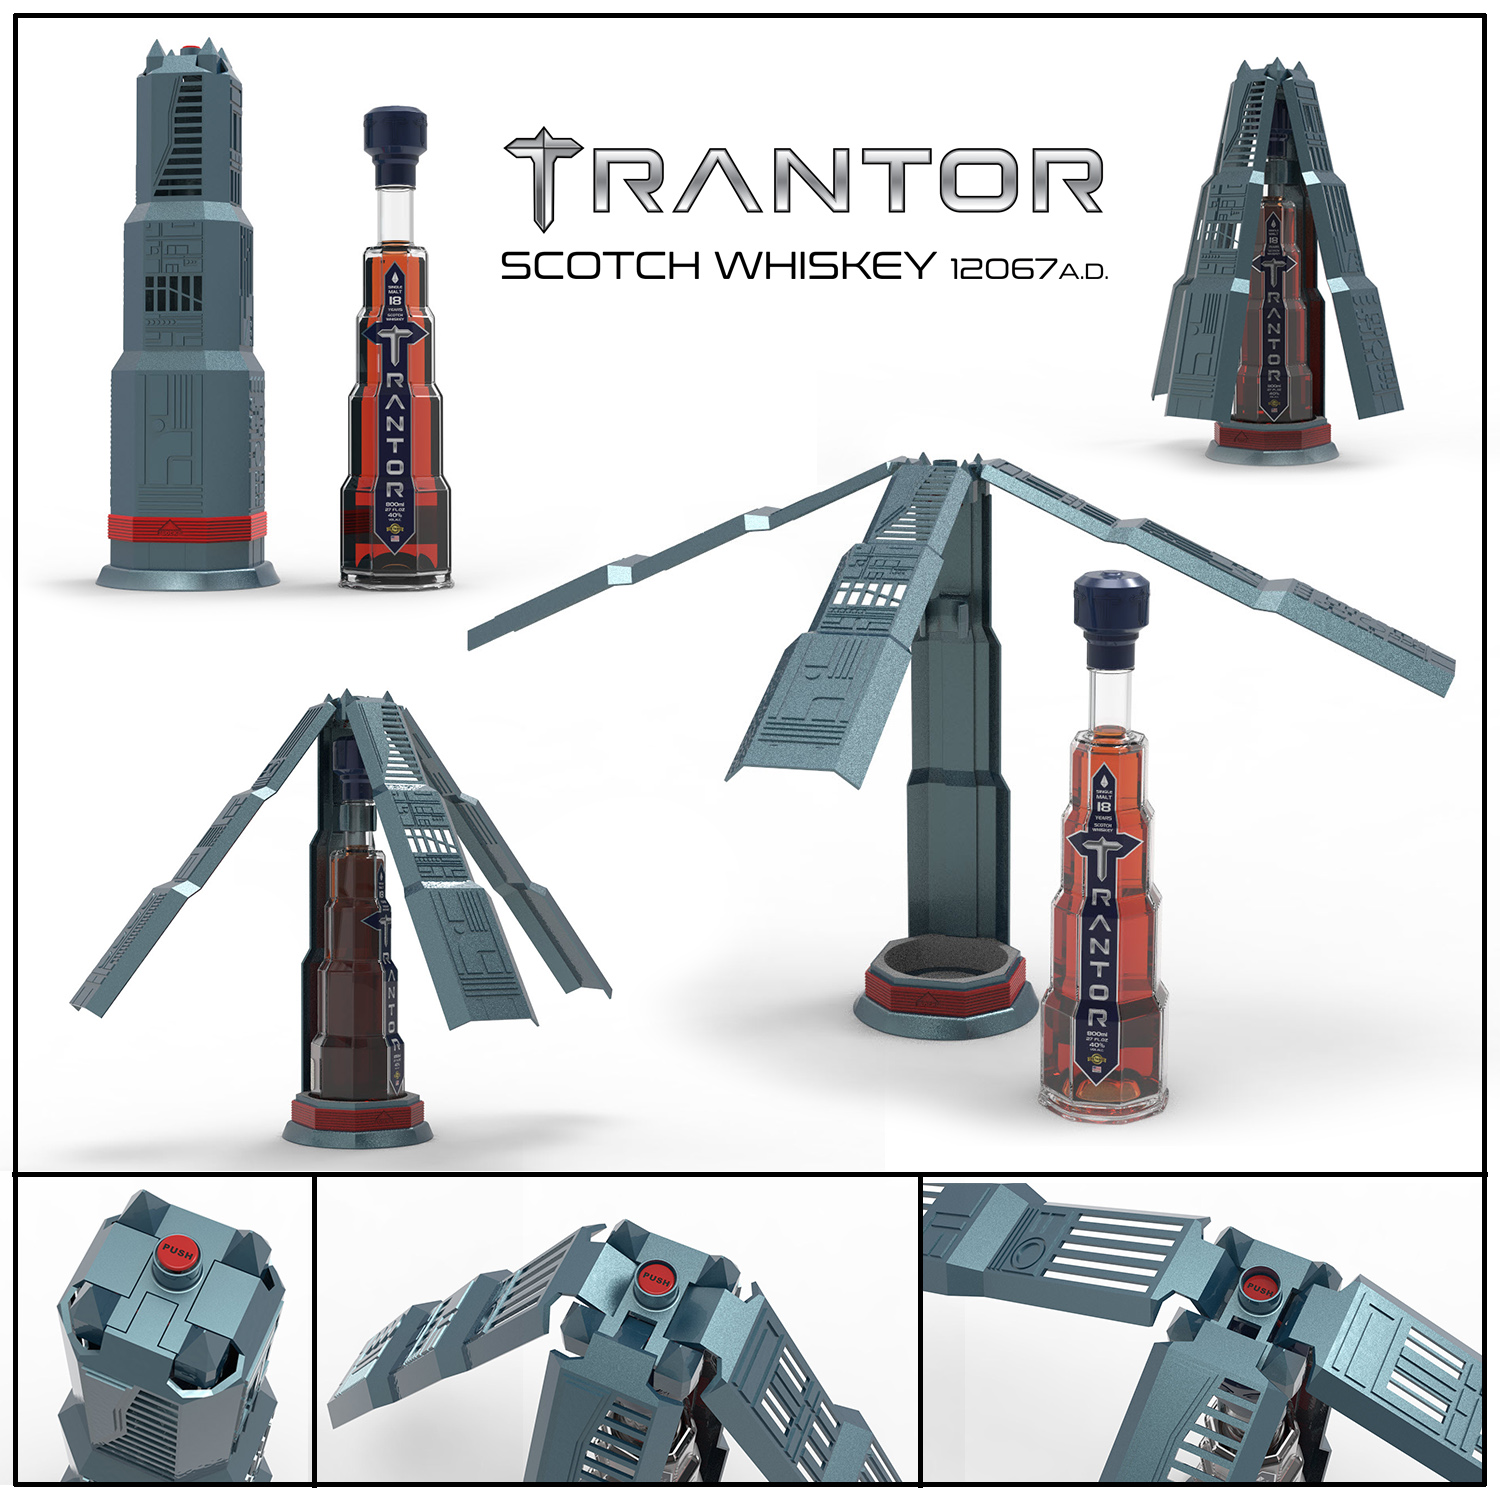 Trantor Scotch Whiskey Packagting USA